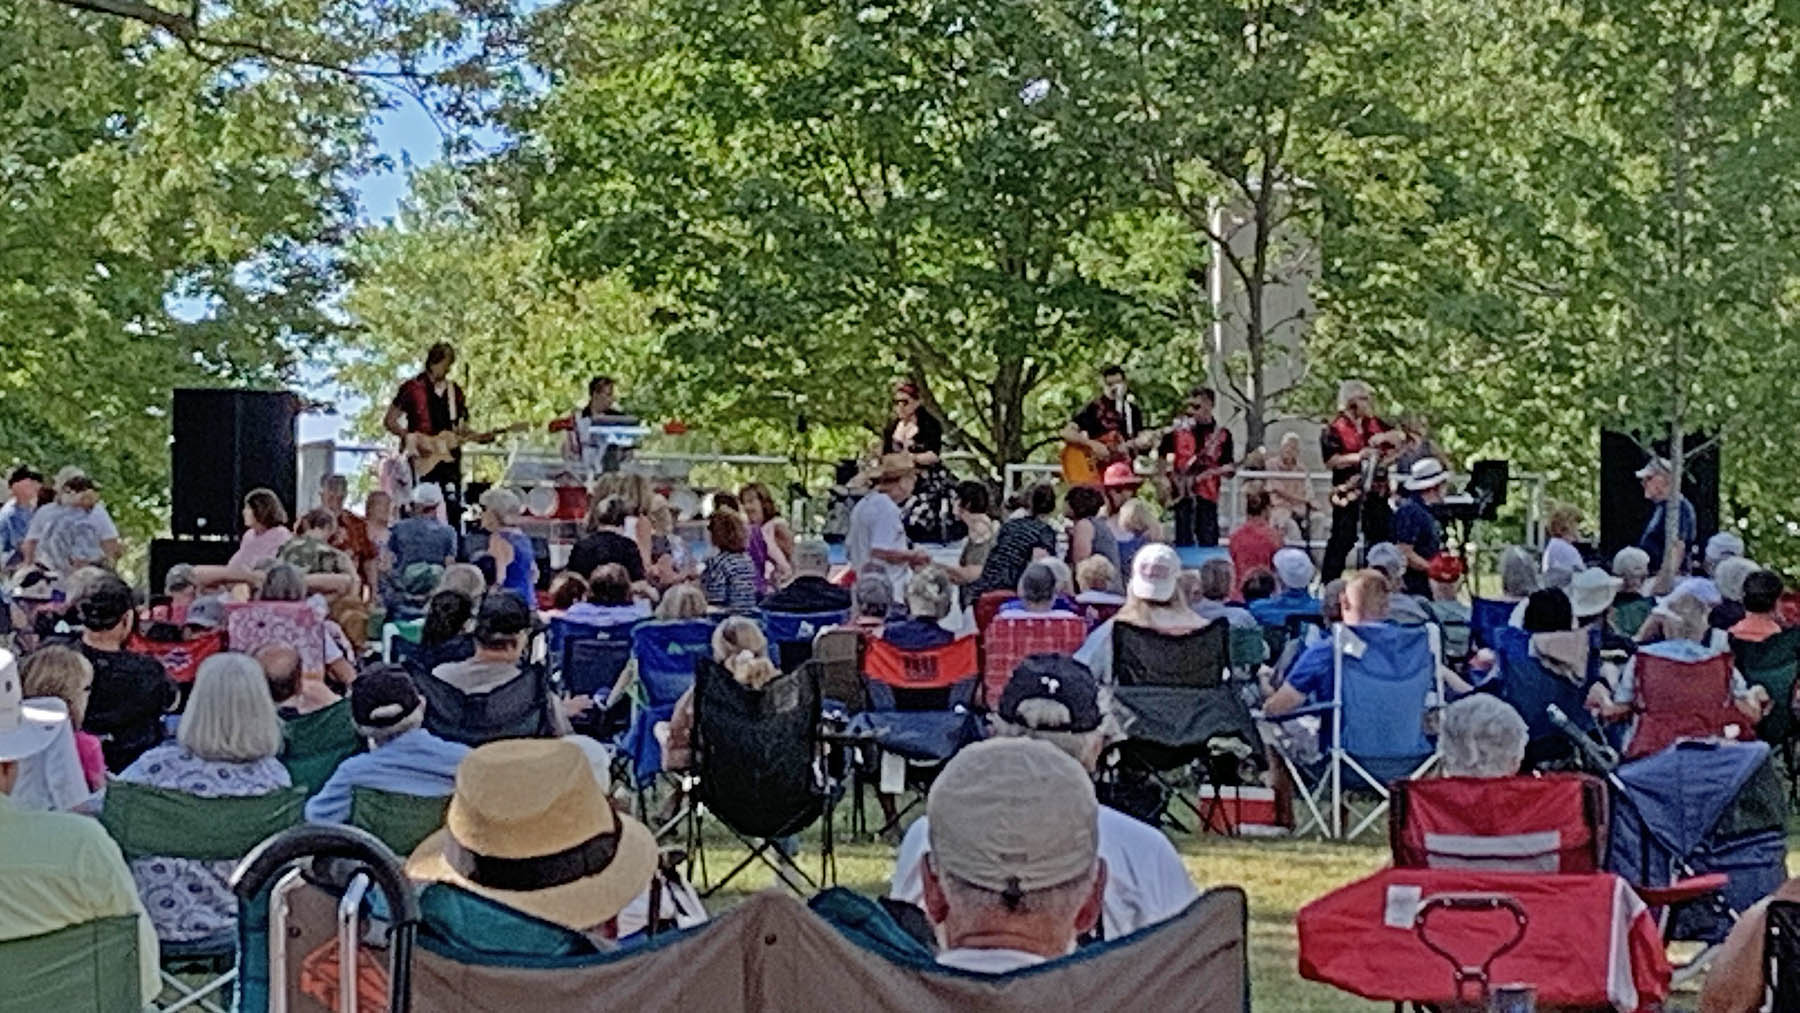 Photo of the band and audience from the 2022 performance by Ruby Shooz at the Sackets Harbor Battlefield